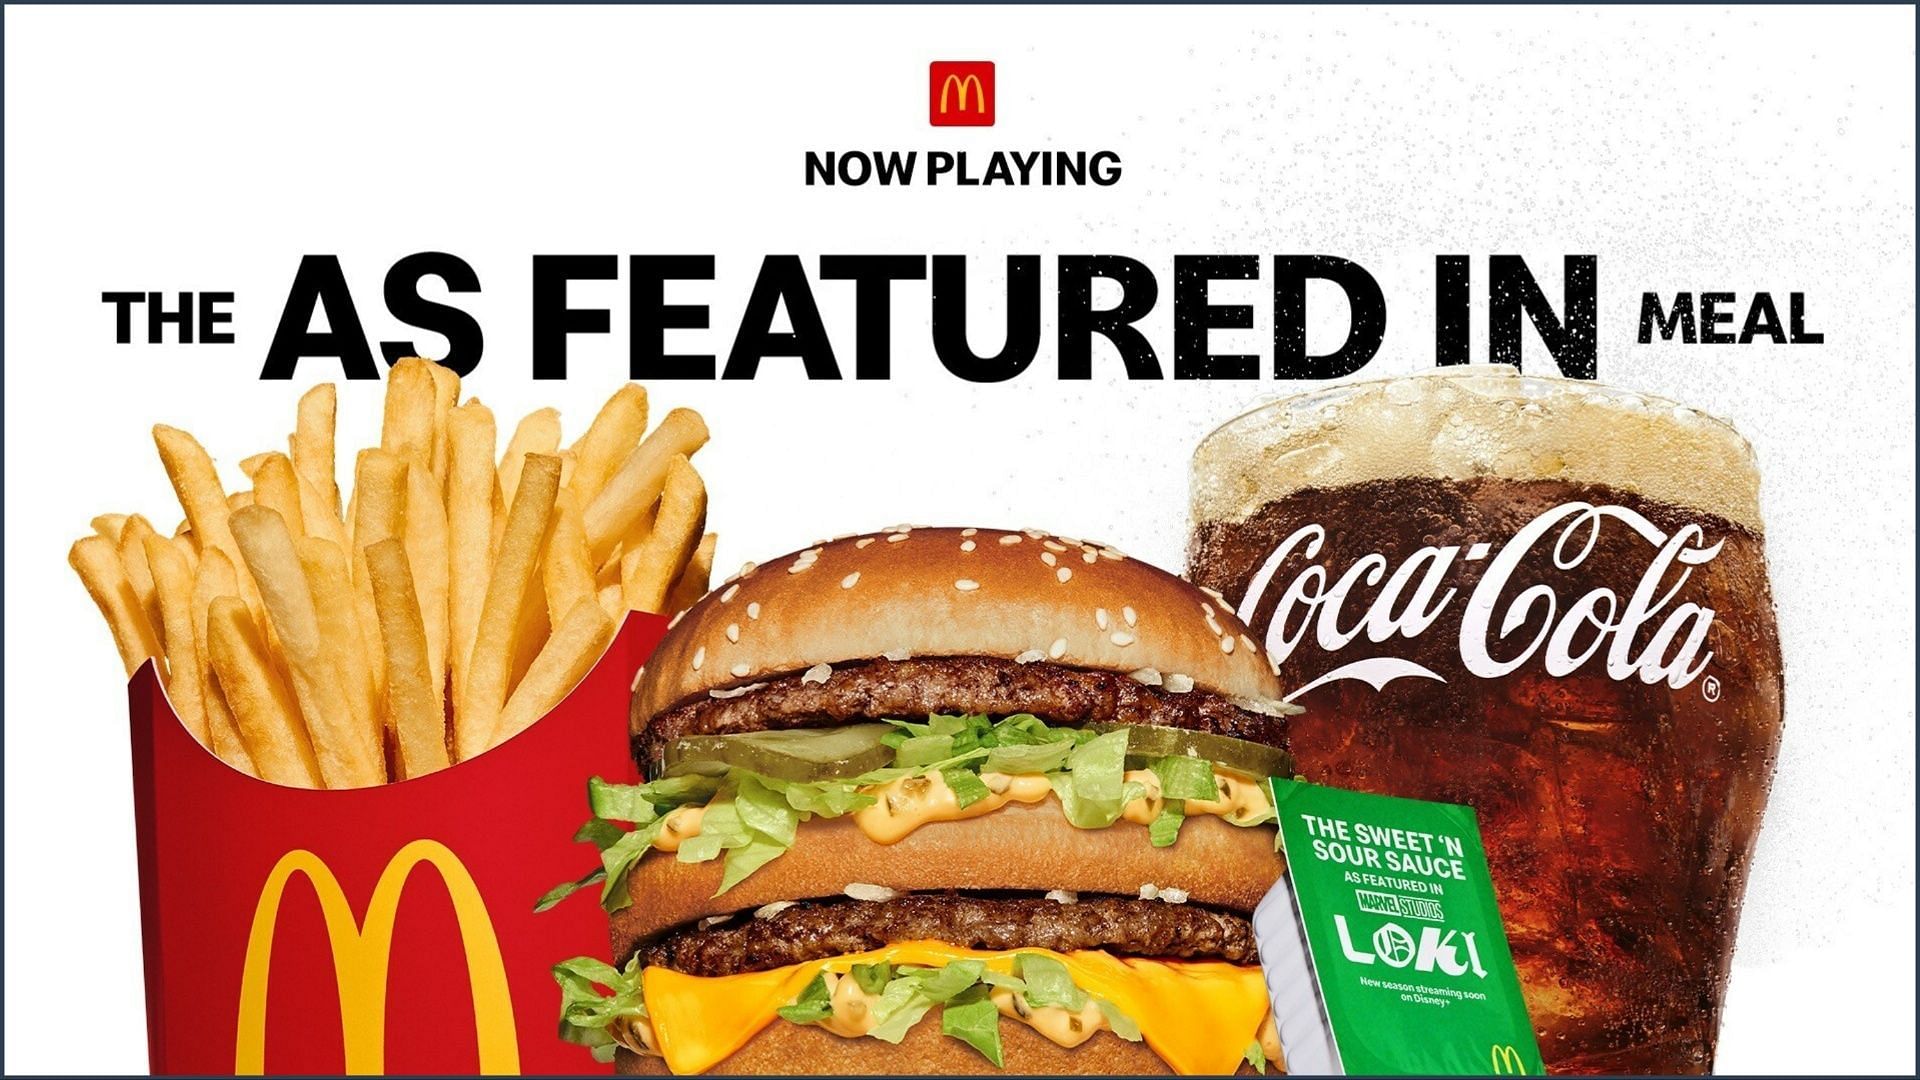 McDonald&rsquo;s introduces new &lsquo;As Featured In&rsquo; meals in honor of its promotional features in popular entertainment shows (Image via McDonald&rsquo;s)